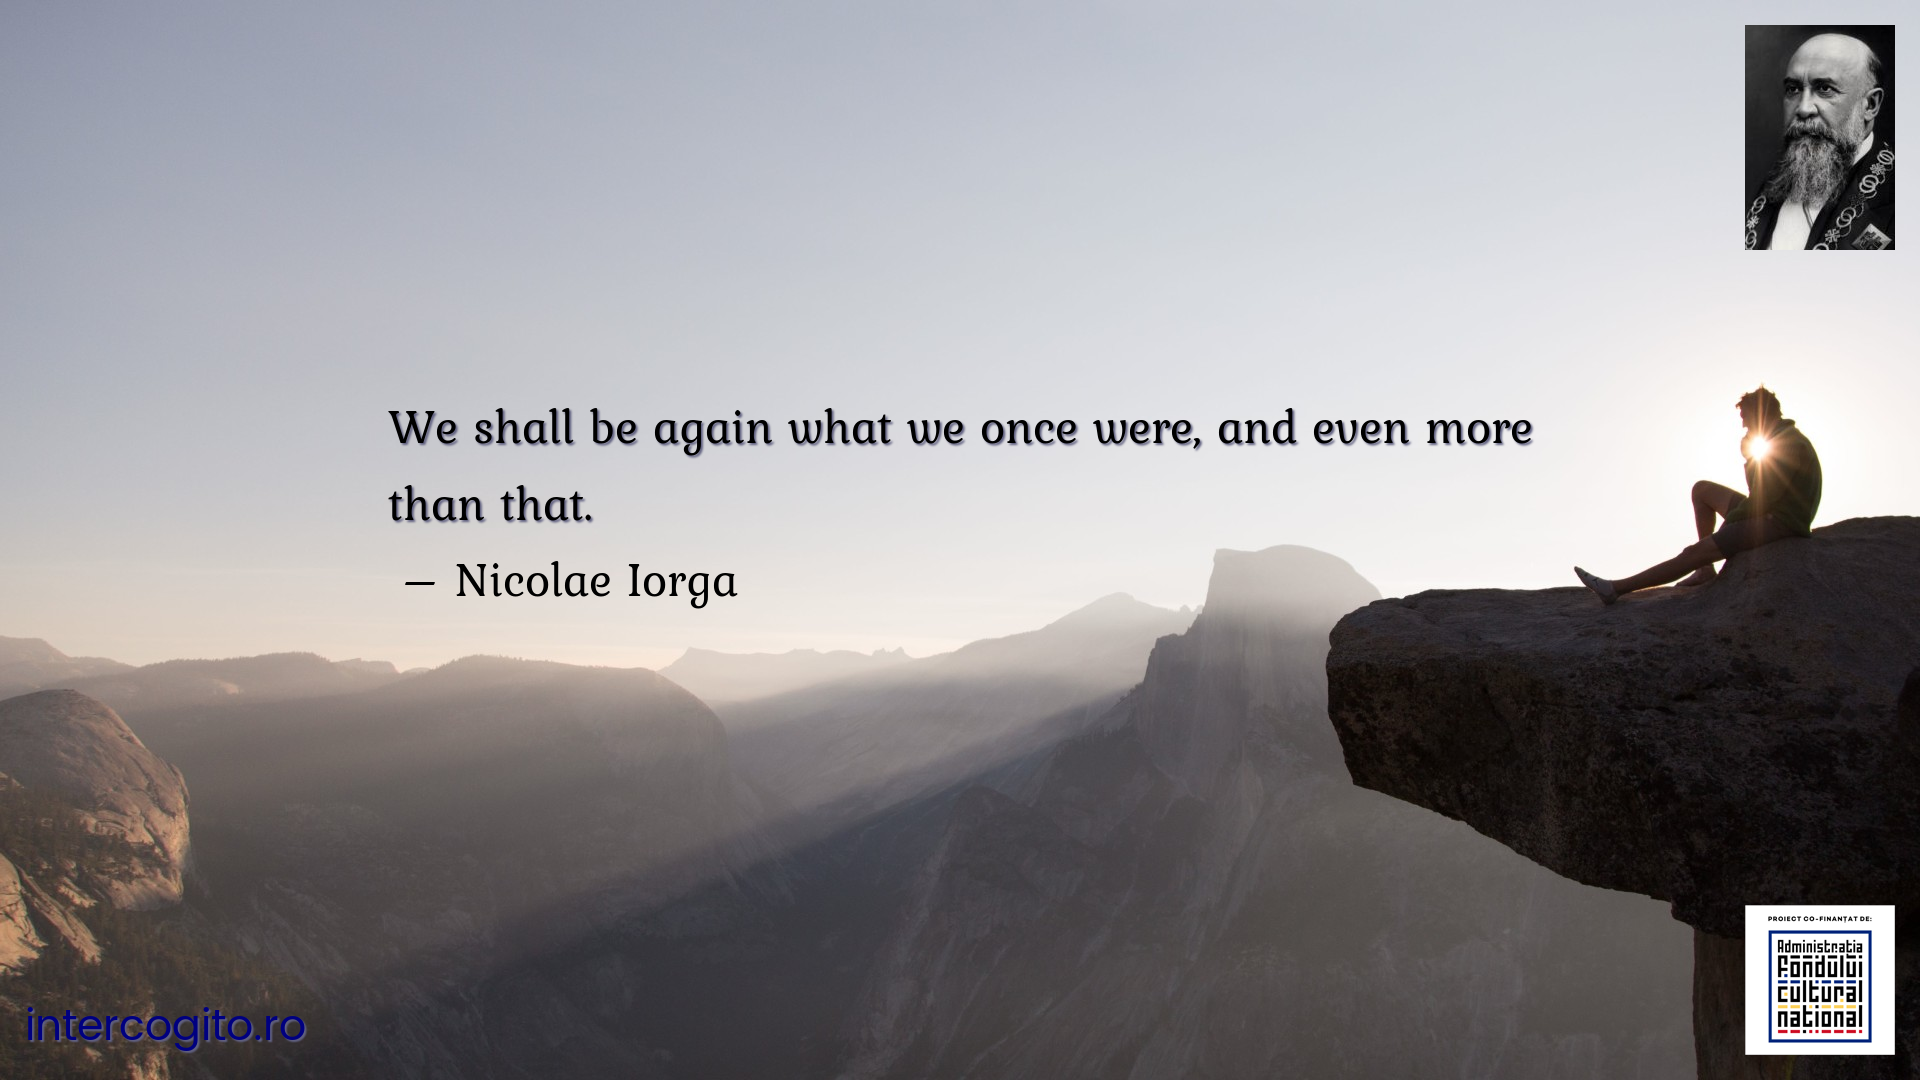 We shall be again what we once were, and even more than that.